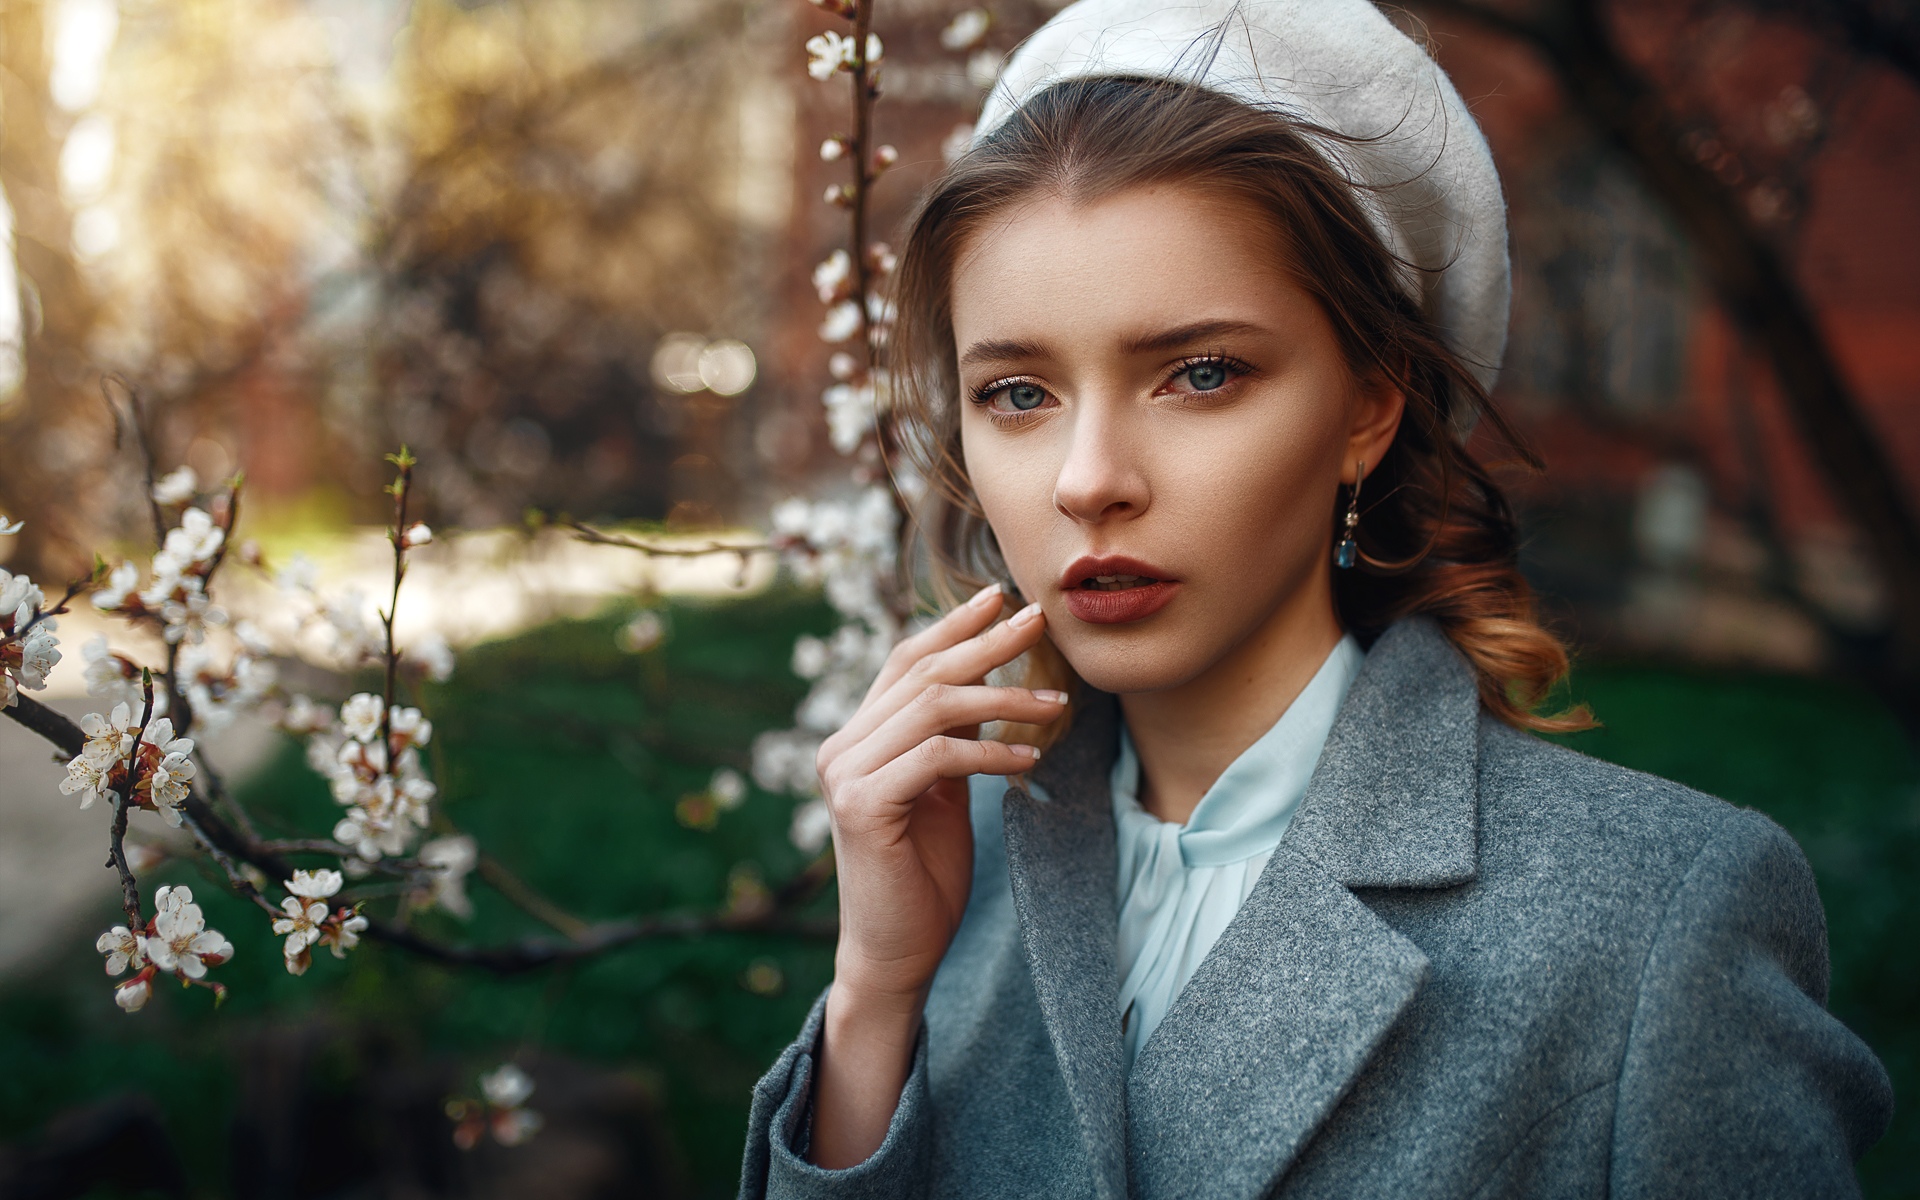 Women Model Blonde Looking At Viewer Blue Eyes Touching Face Berets Earring Portrait Outdoors Coats  1920x1200